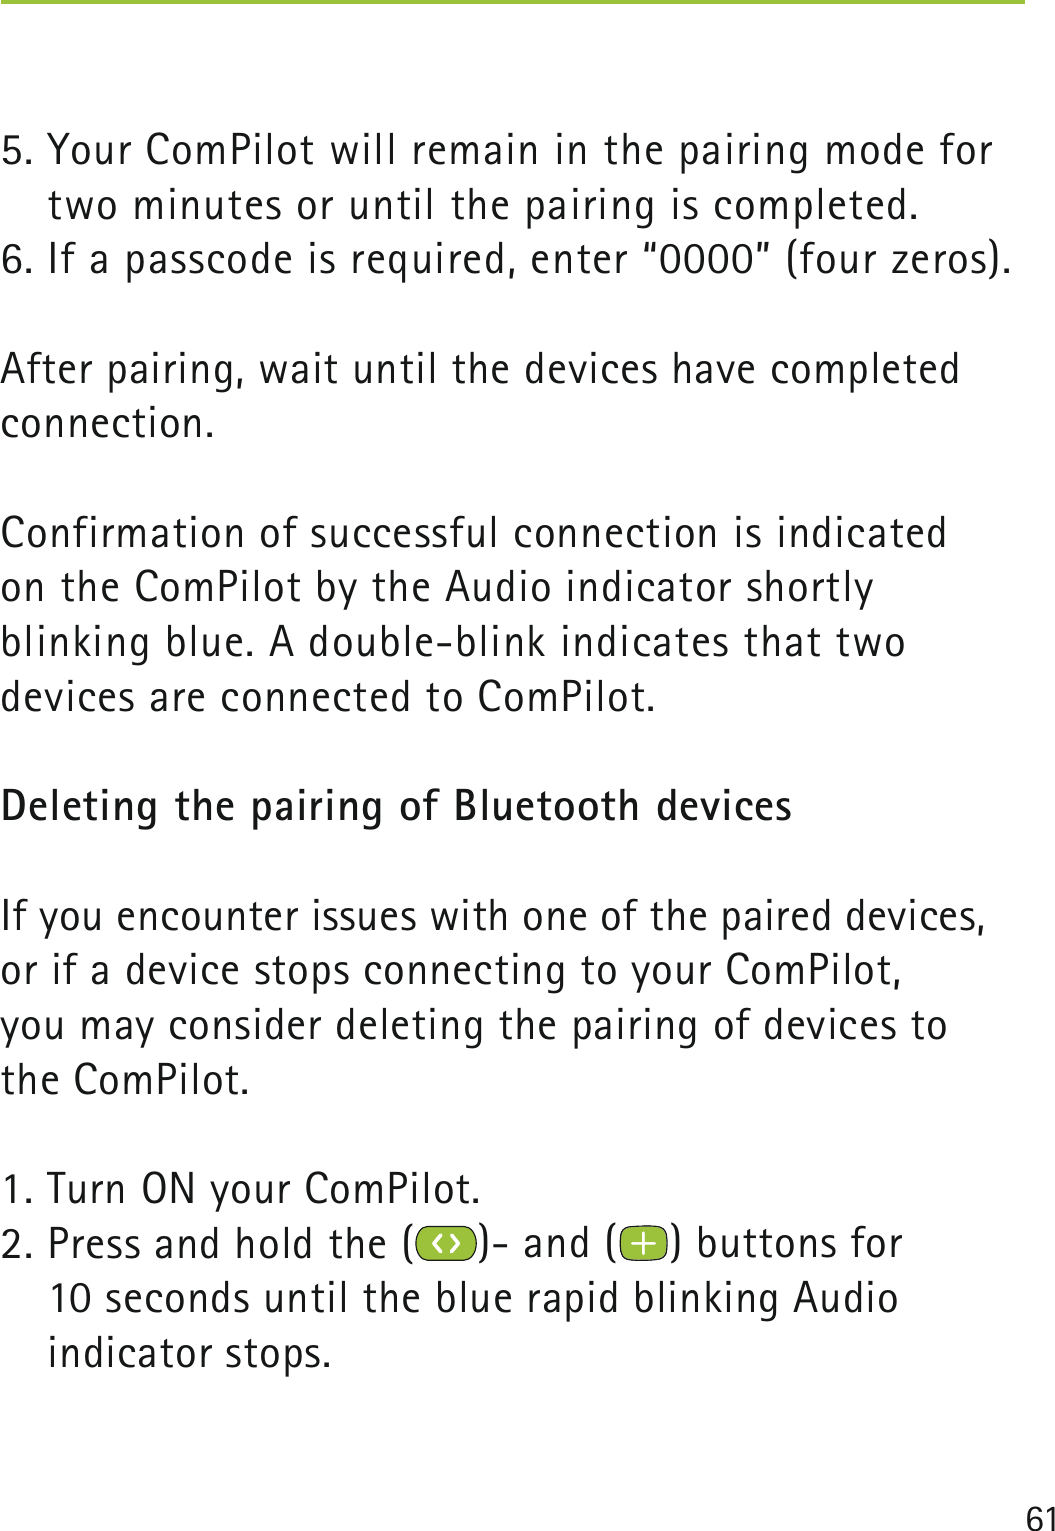 615. Your ComPilot will remain in the pairing mode for two minutes or until the pairing is completed.6. If a passcode is required, enter “0000” (four zeros). After pairing, wait until the devices have completed connection.Confirmation of successful connection is indicated  on the ComPilot by the Audio indicator shortly  blinking blue. A double-blink indicates that two  devices are connected to ComPilot.Deleting the pairing of Bluetooth devices If you encounter issues with one of the paired devices, or if a device stops connecting to your ComPilot,  you may consider deleting the pairing of devices to  the ComPilot.1. Turn ON your ComPilot.2. Press and hold the ( )- and ( ) buttons for  10 seconds until the blue rapid blinking Audio  indicator stops. 